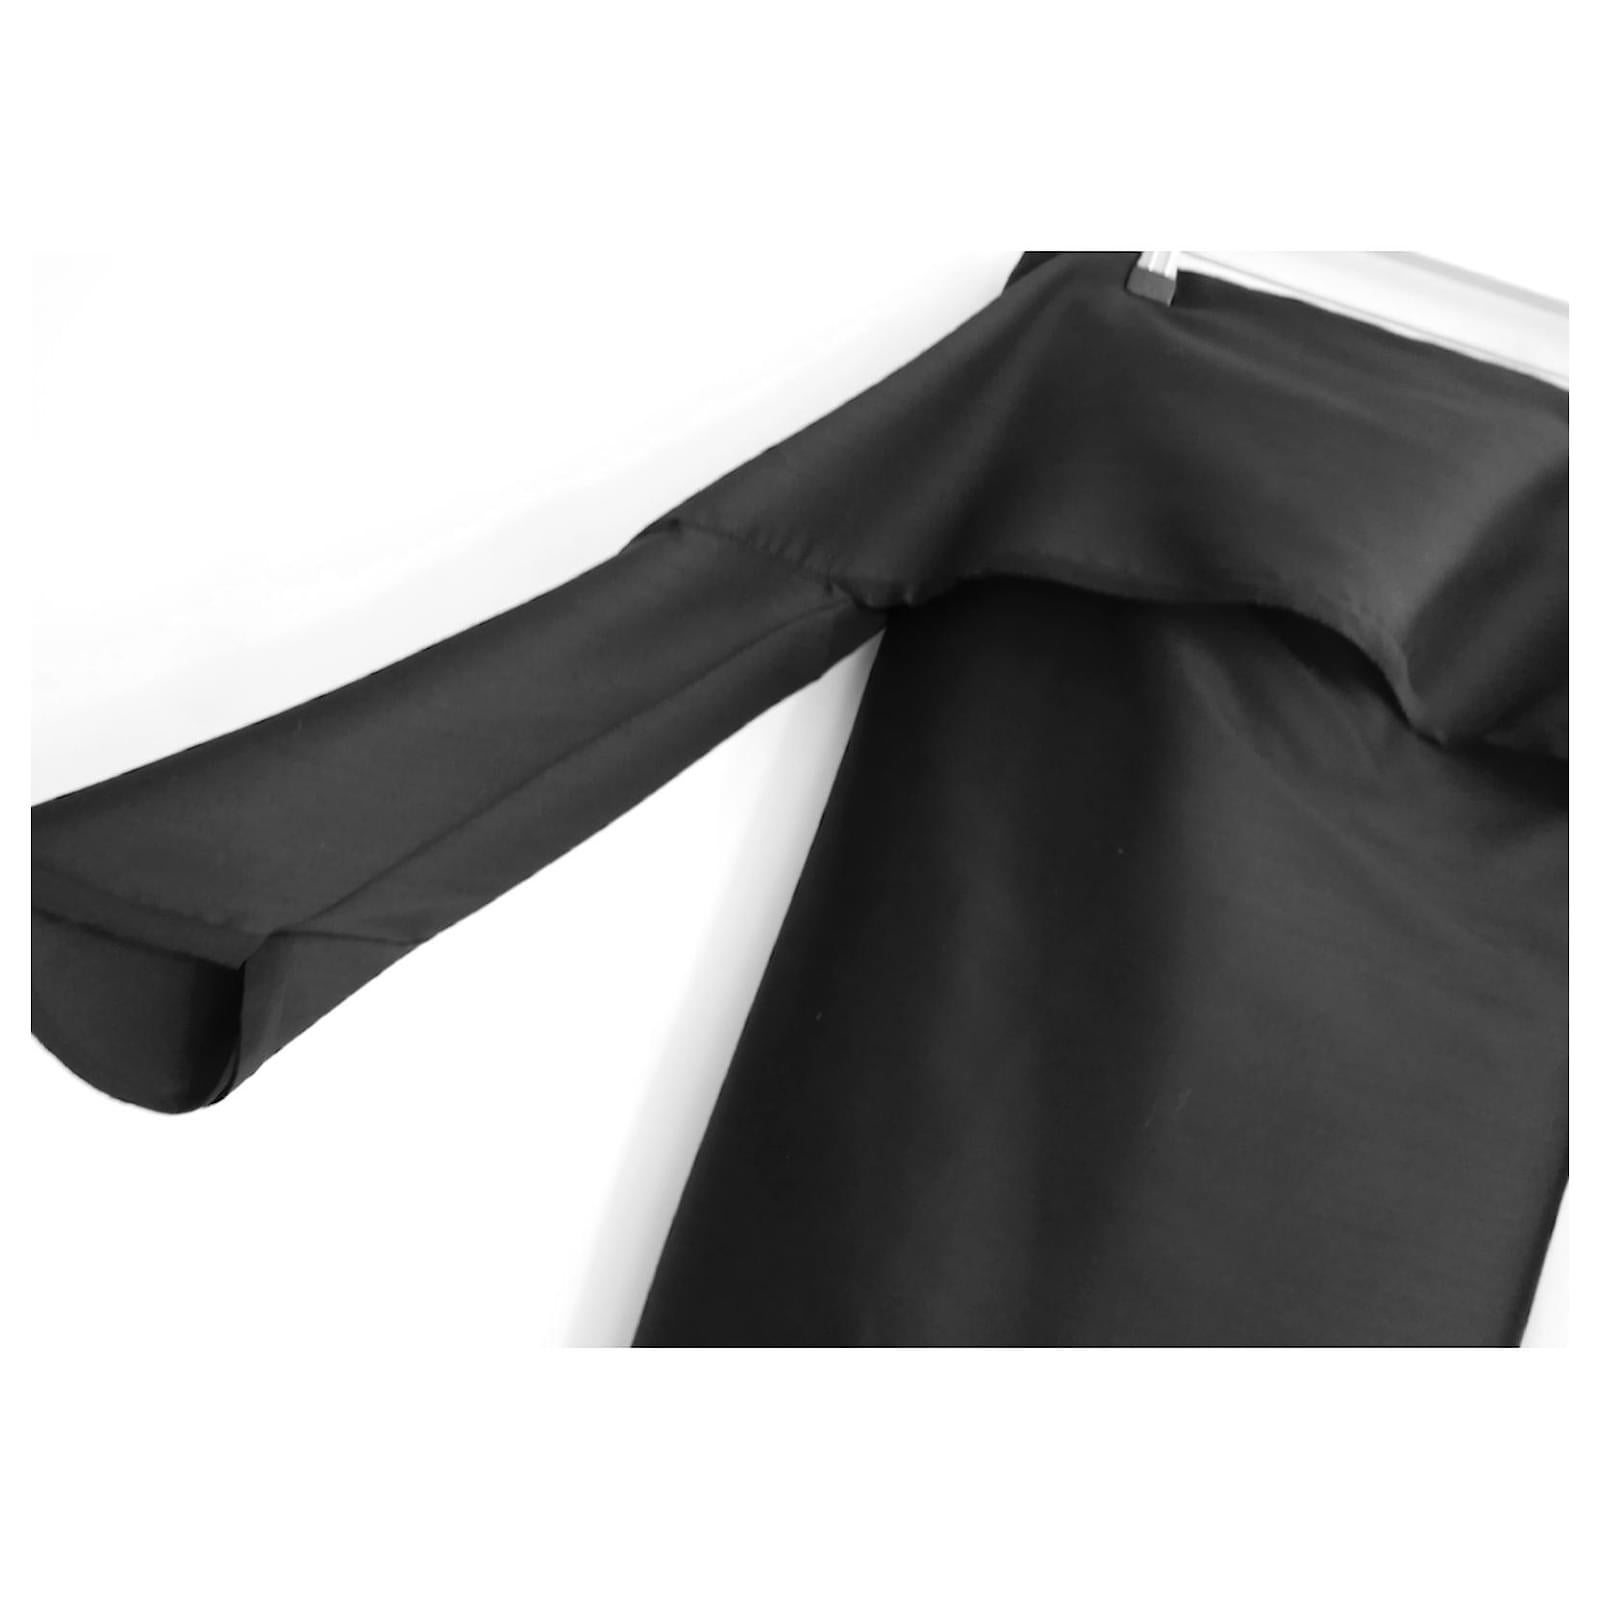  Dion Lee Off The Shoulder Taffeta Mini Dress In Excellent Condition For Sale In London, GB